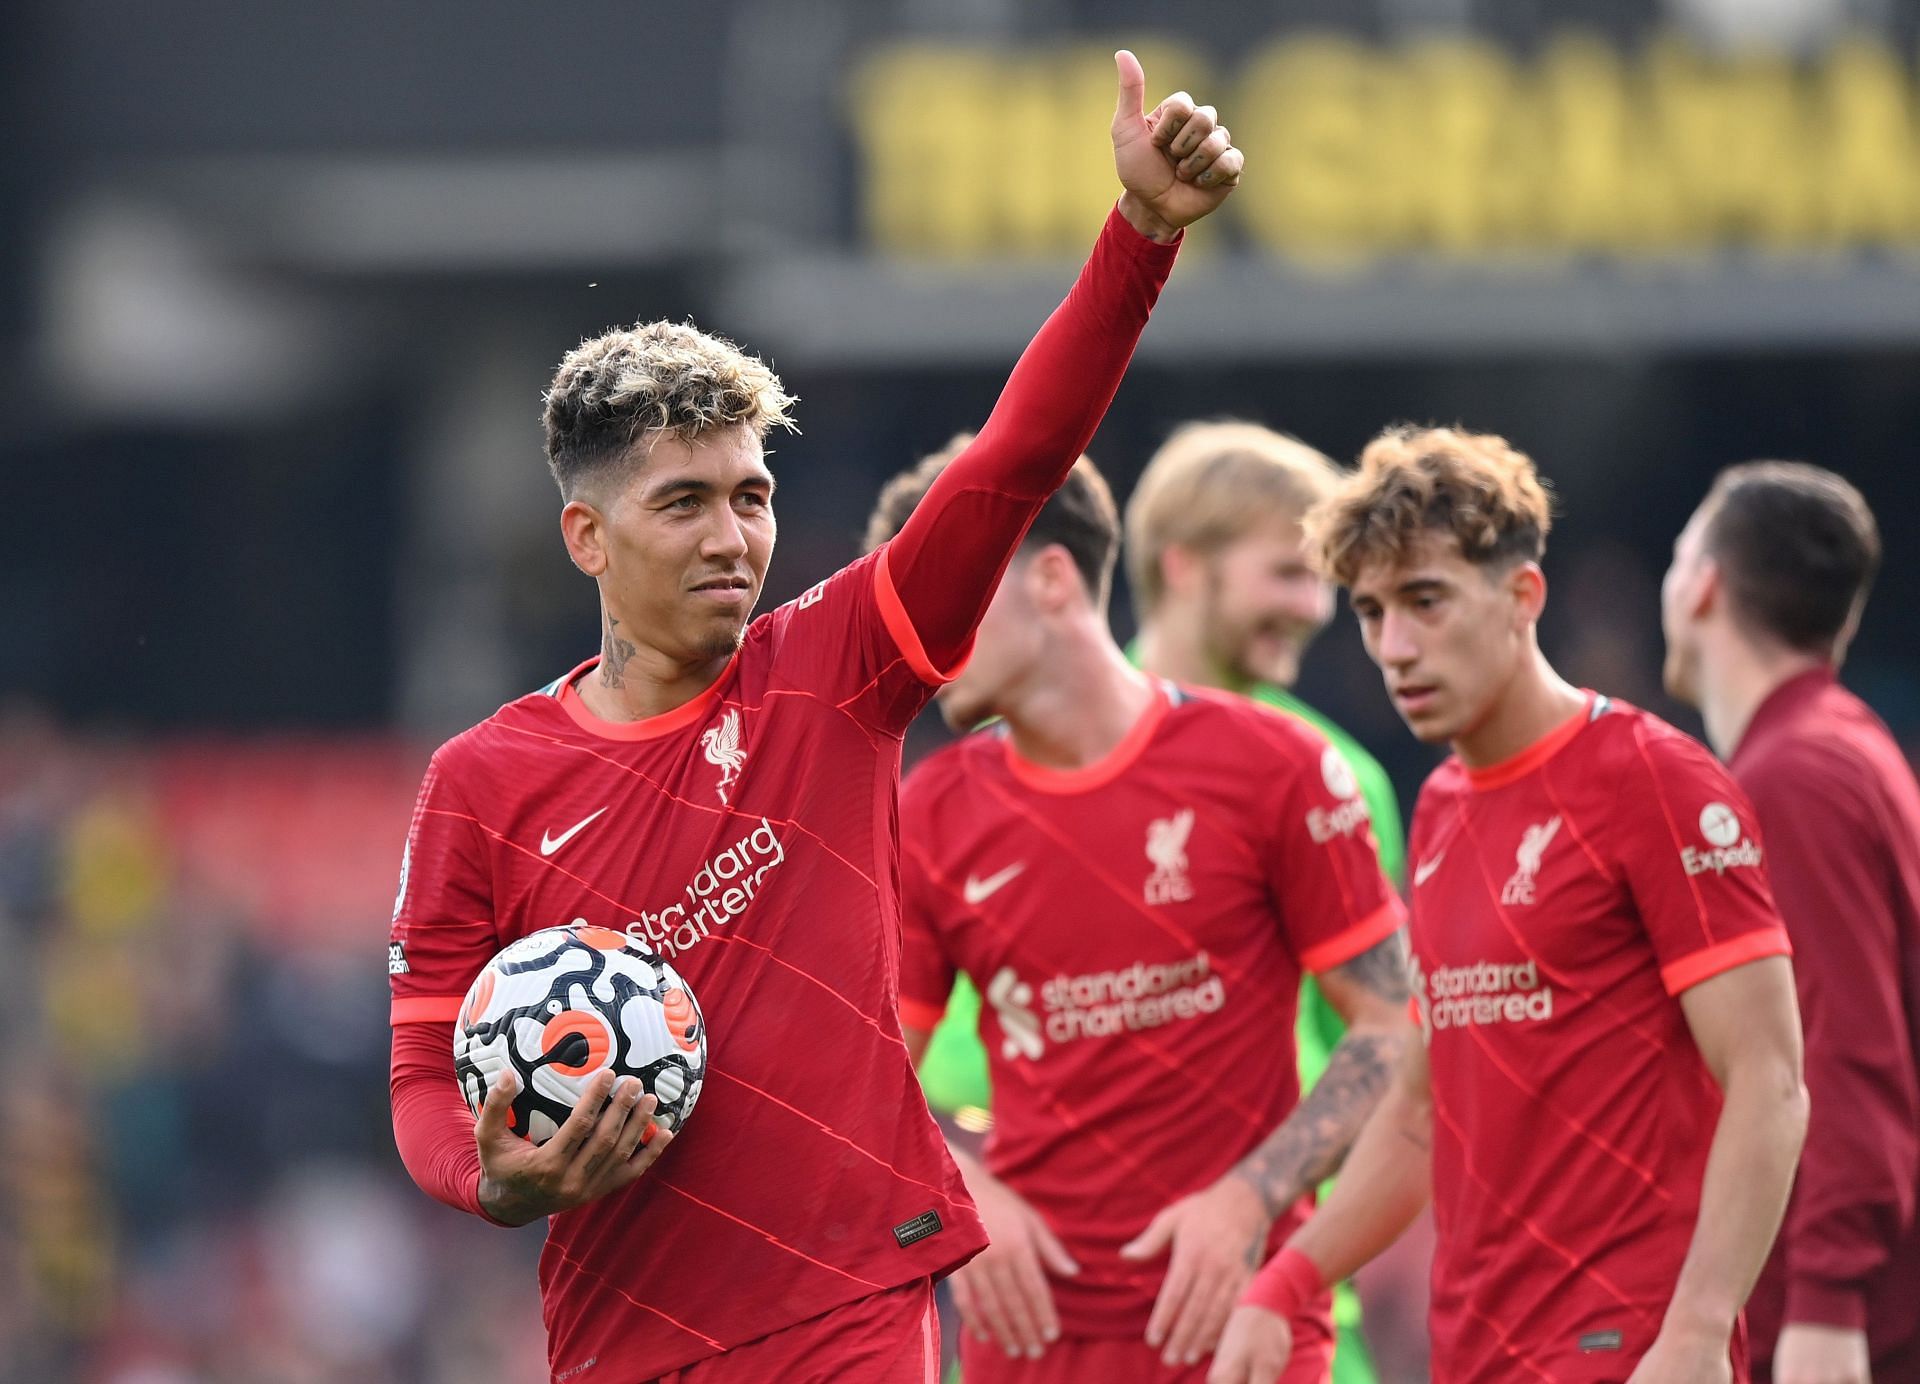 Firmino took home the match ball for his excellent hat-trick.